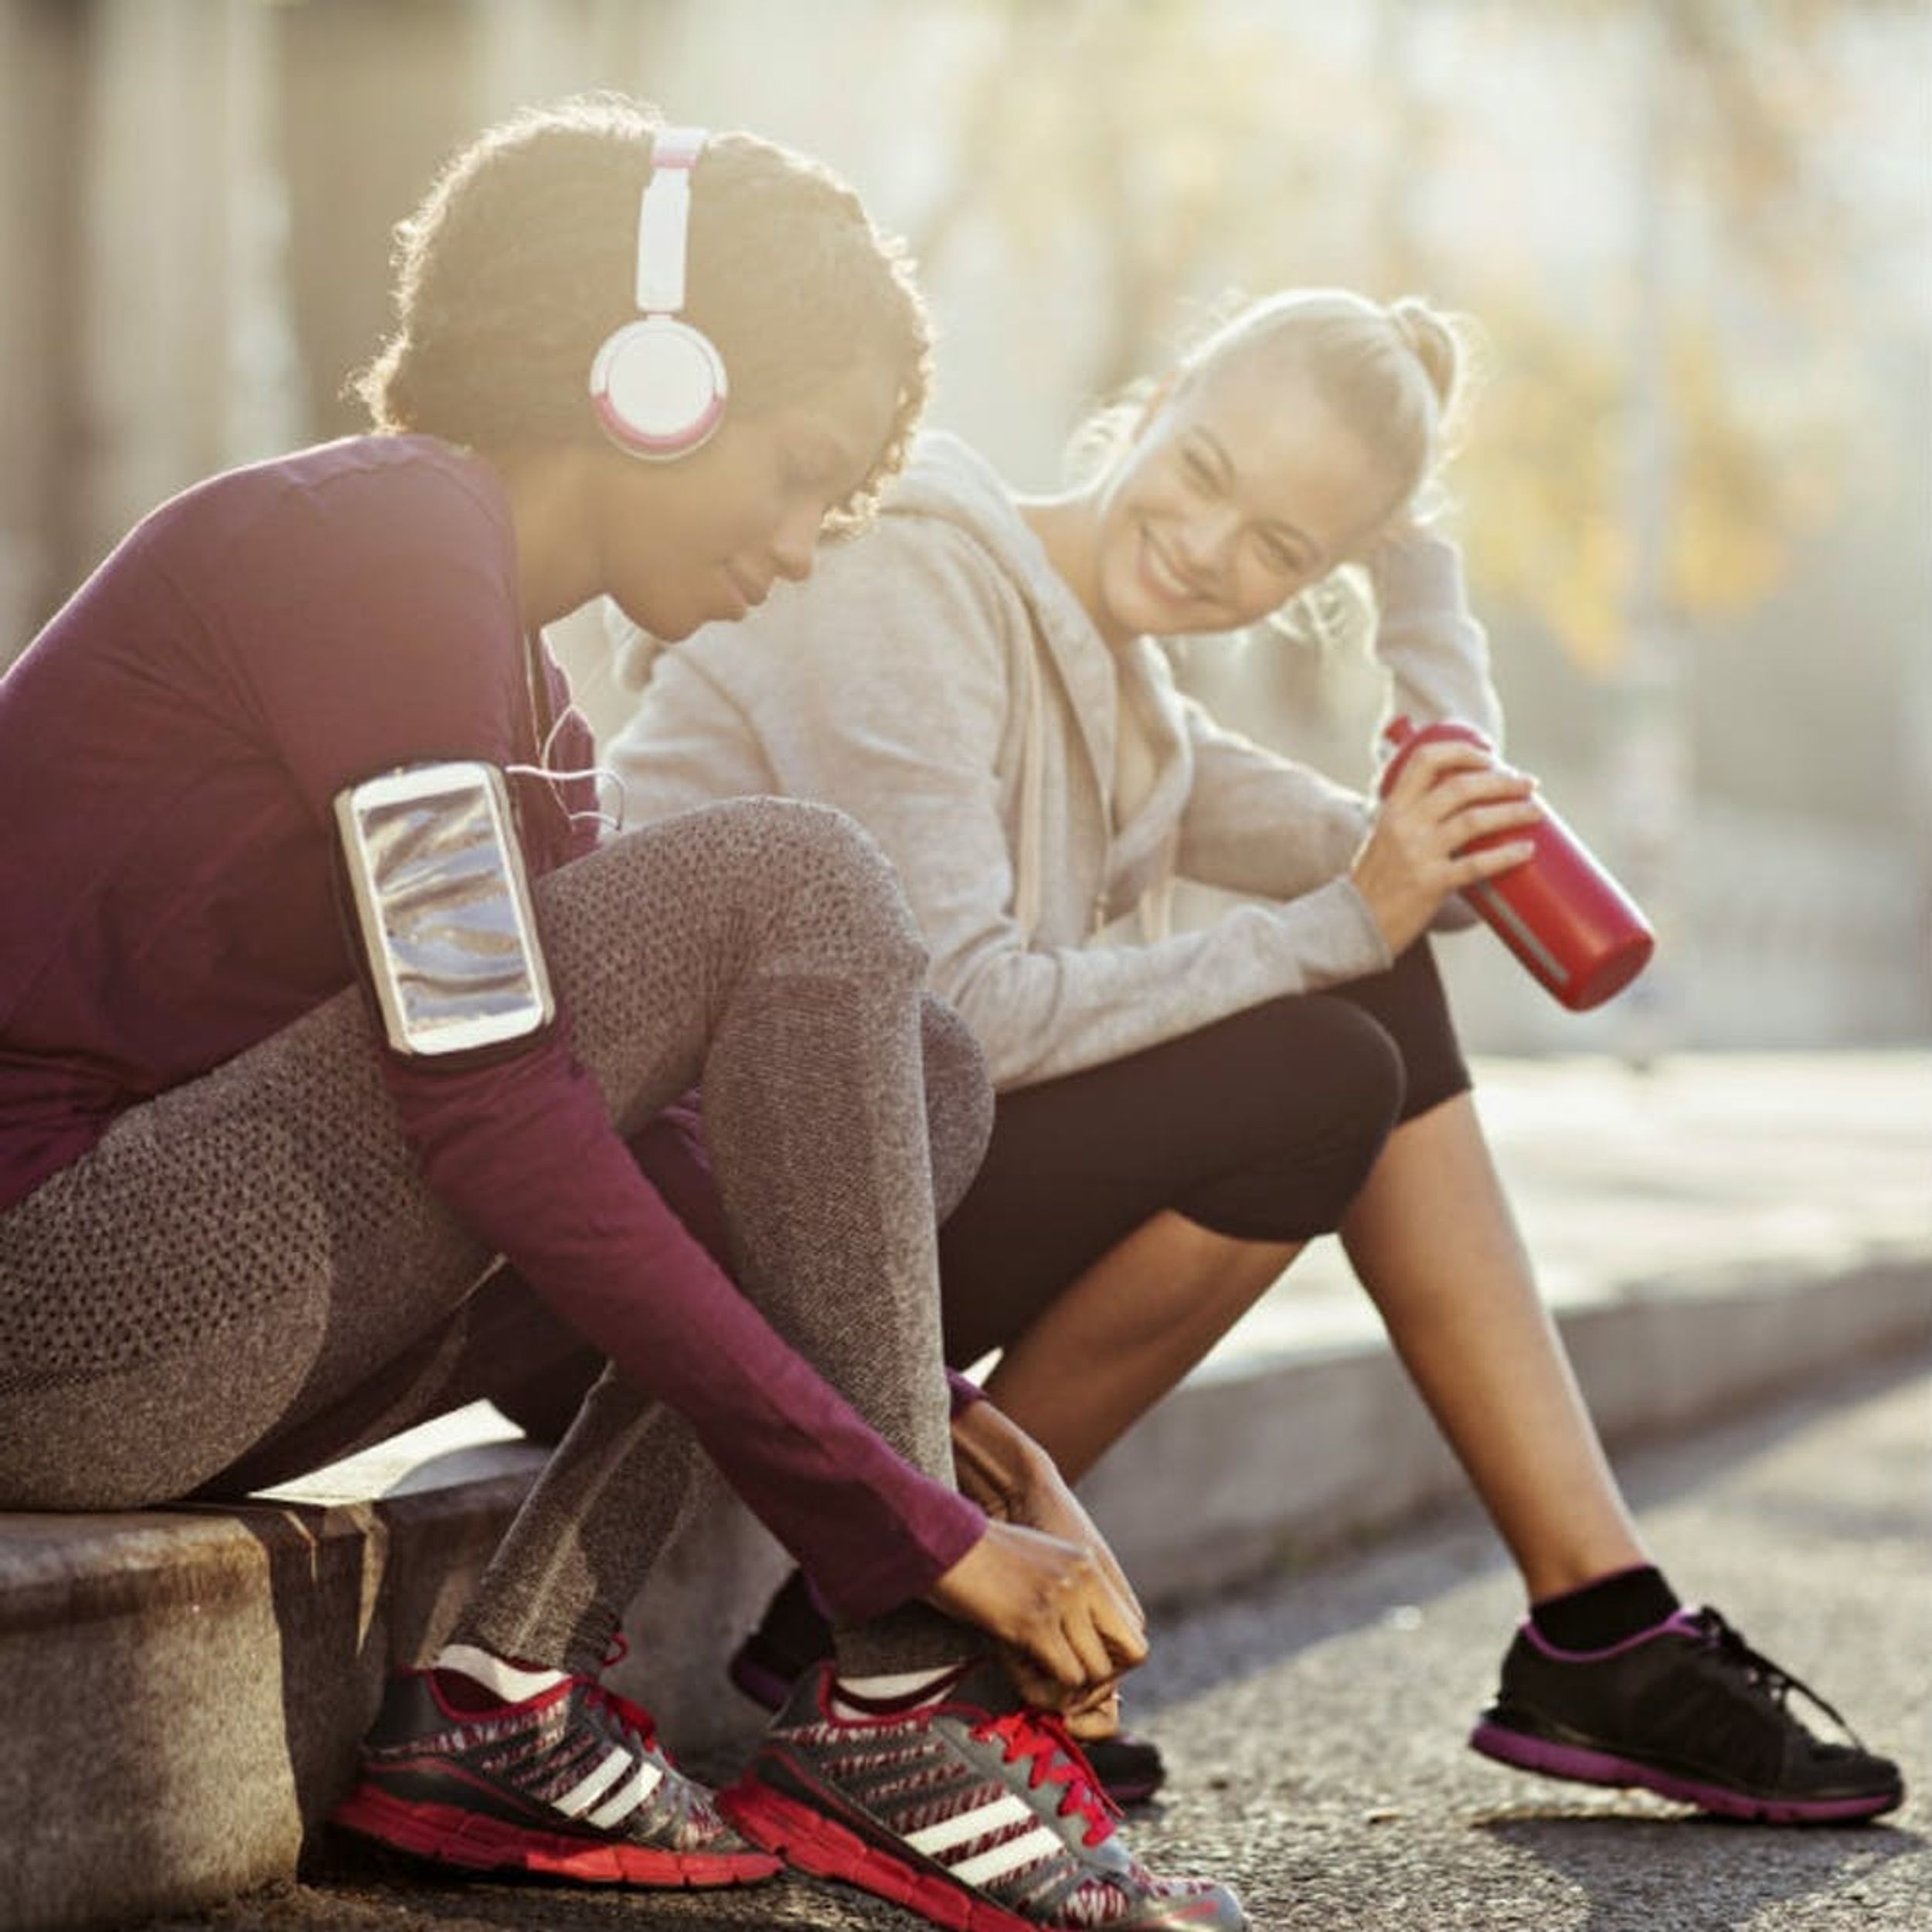 7 YouTube Workouts You Can Do With a Friend